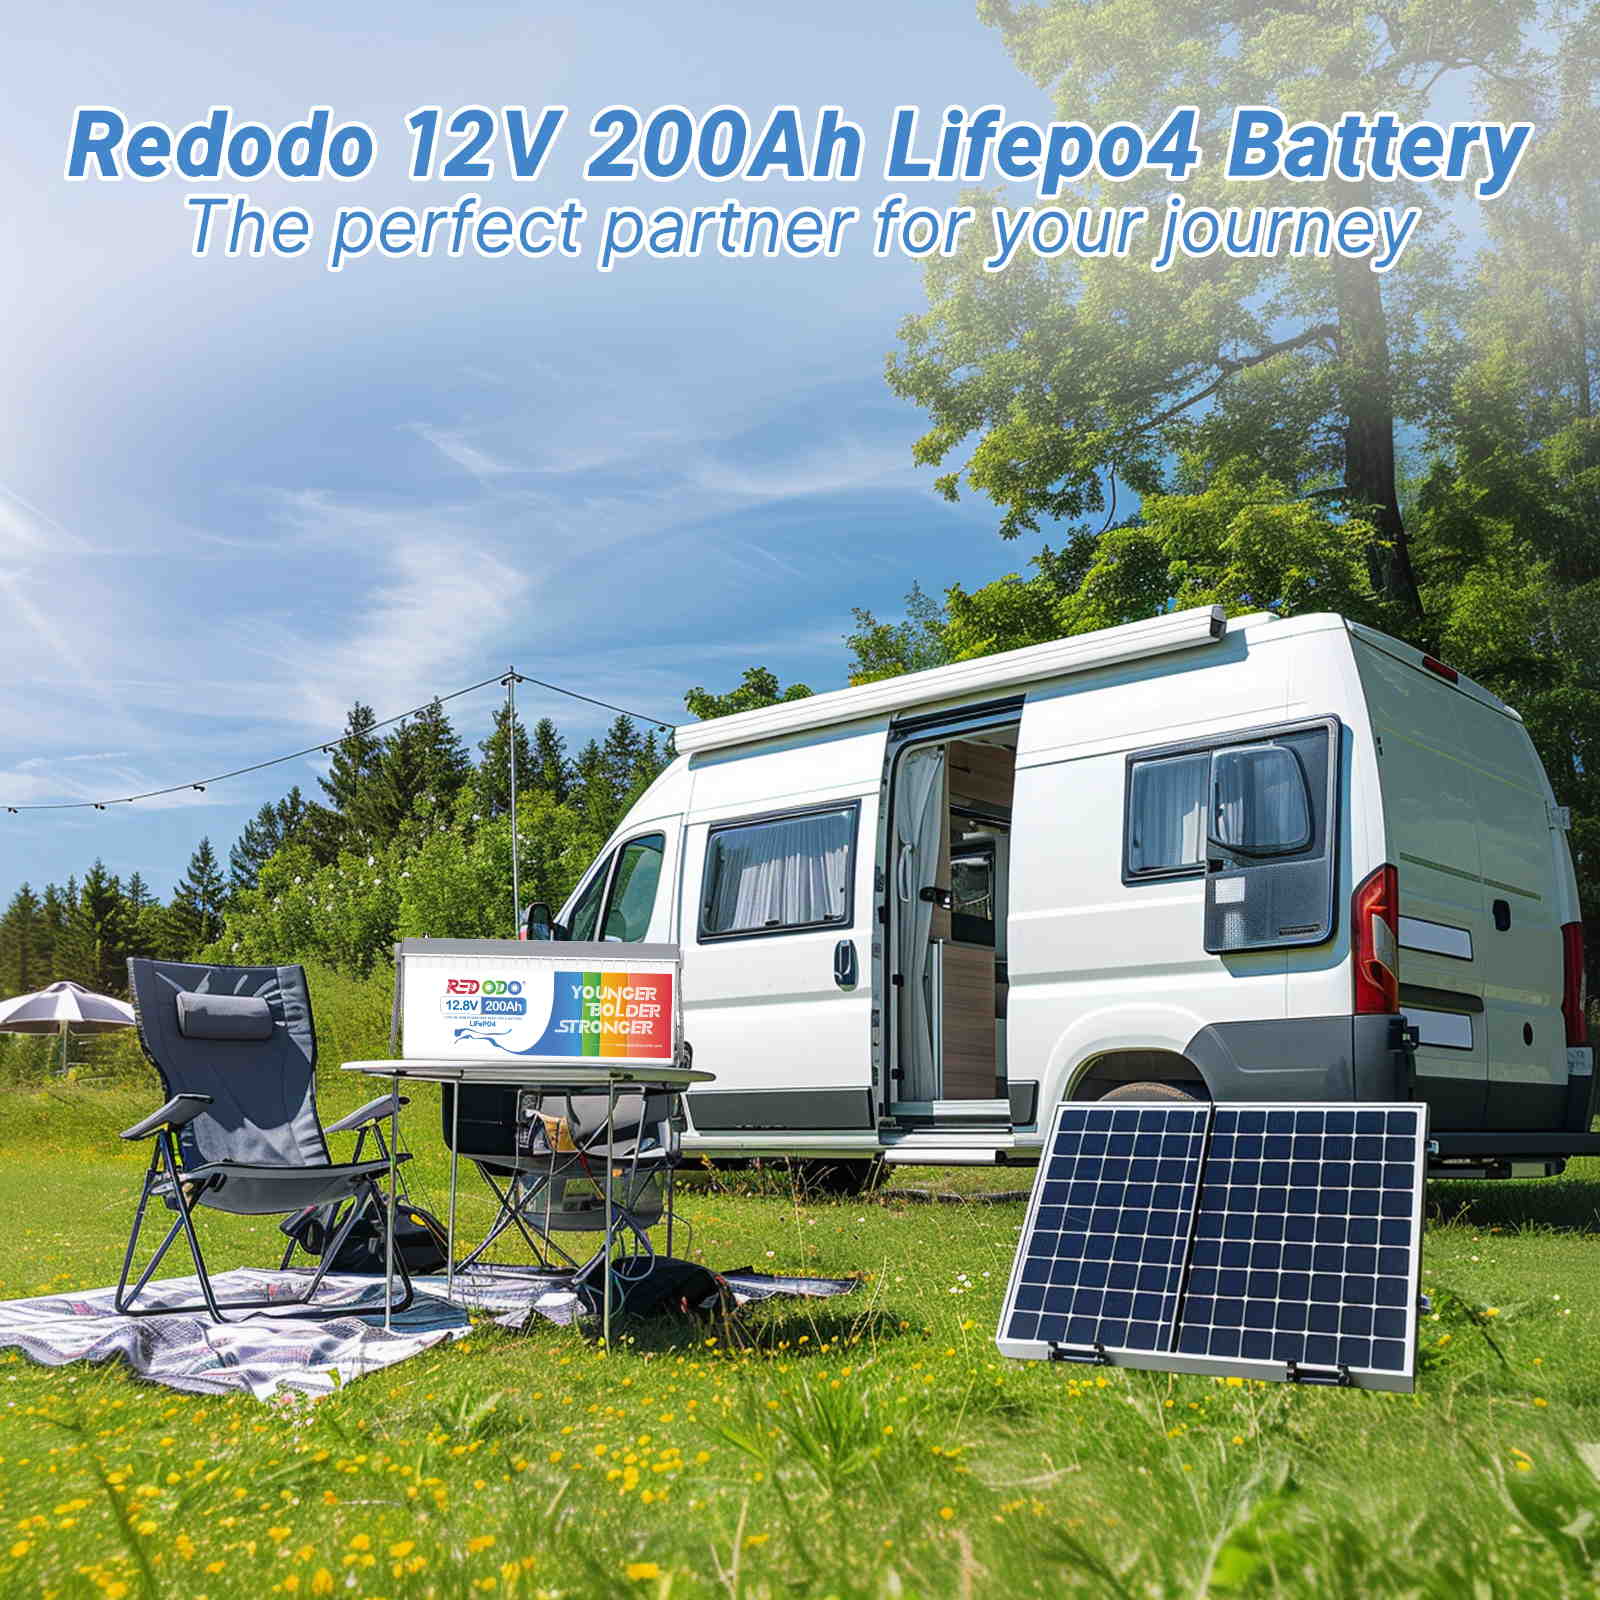 【Only $479】Redodo 12V 200Ah Lithium Battery with 1280W Max. Load Power Redodo